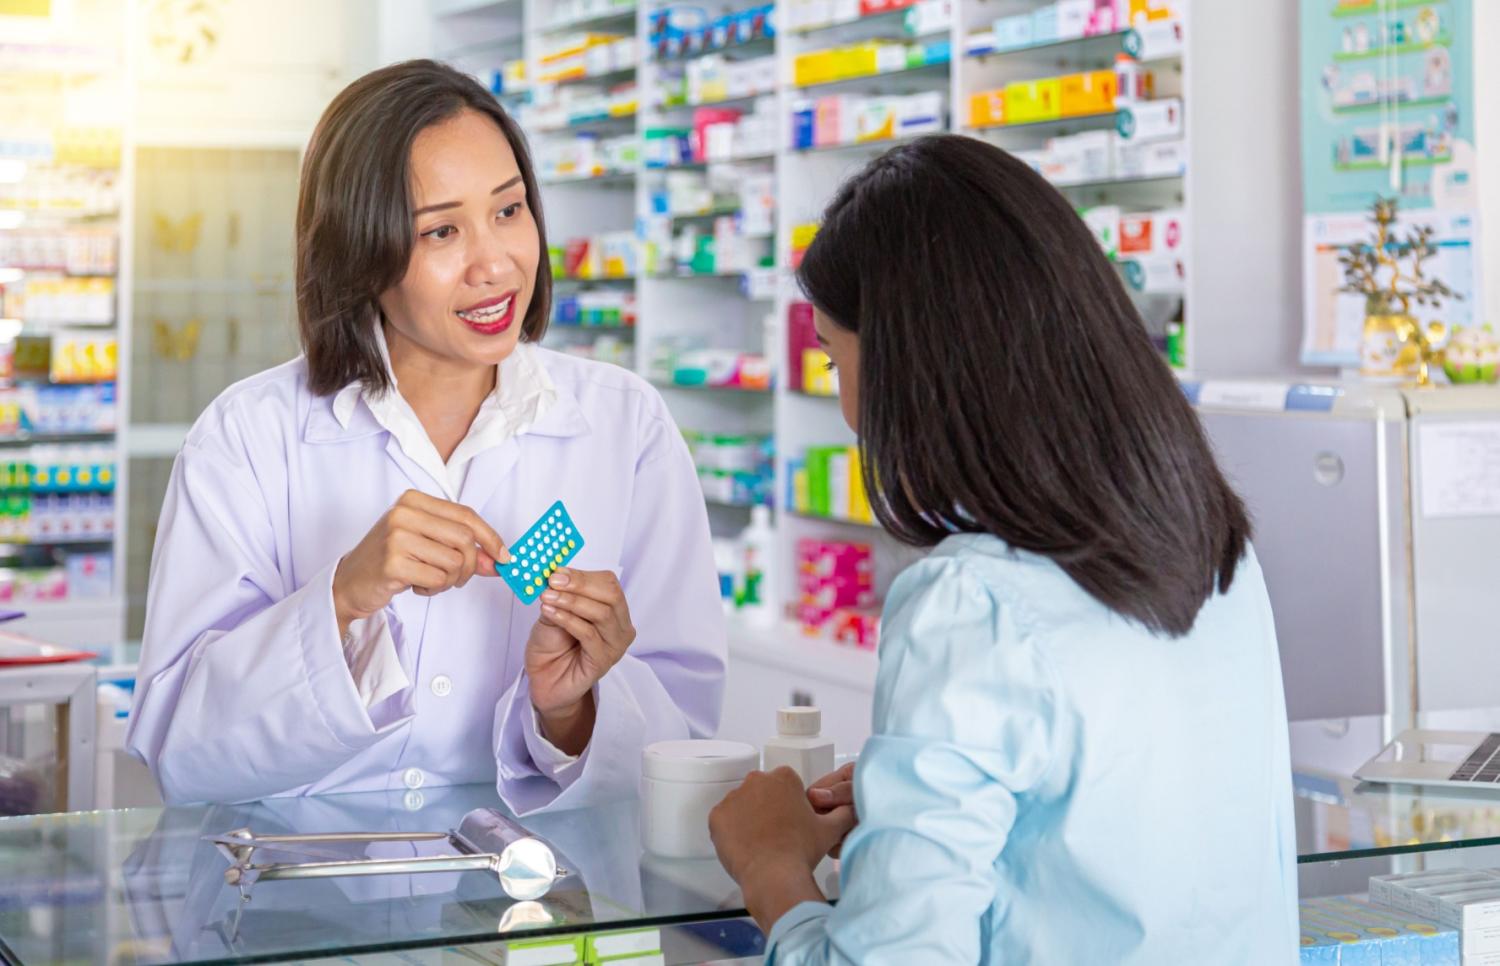 A pharmacist holding a package of birth control pills while speaking to a patient